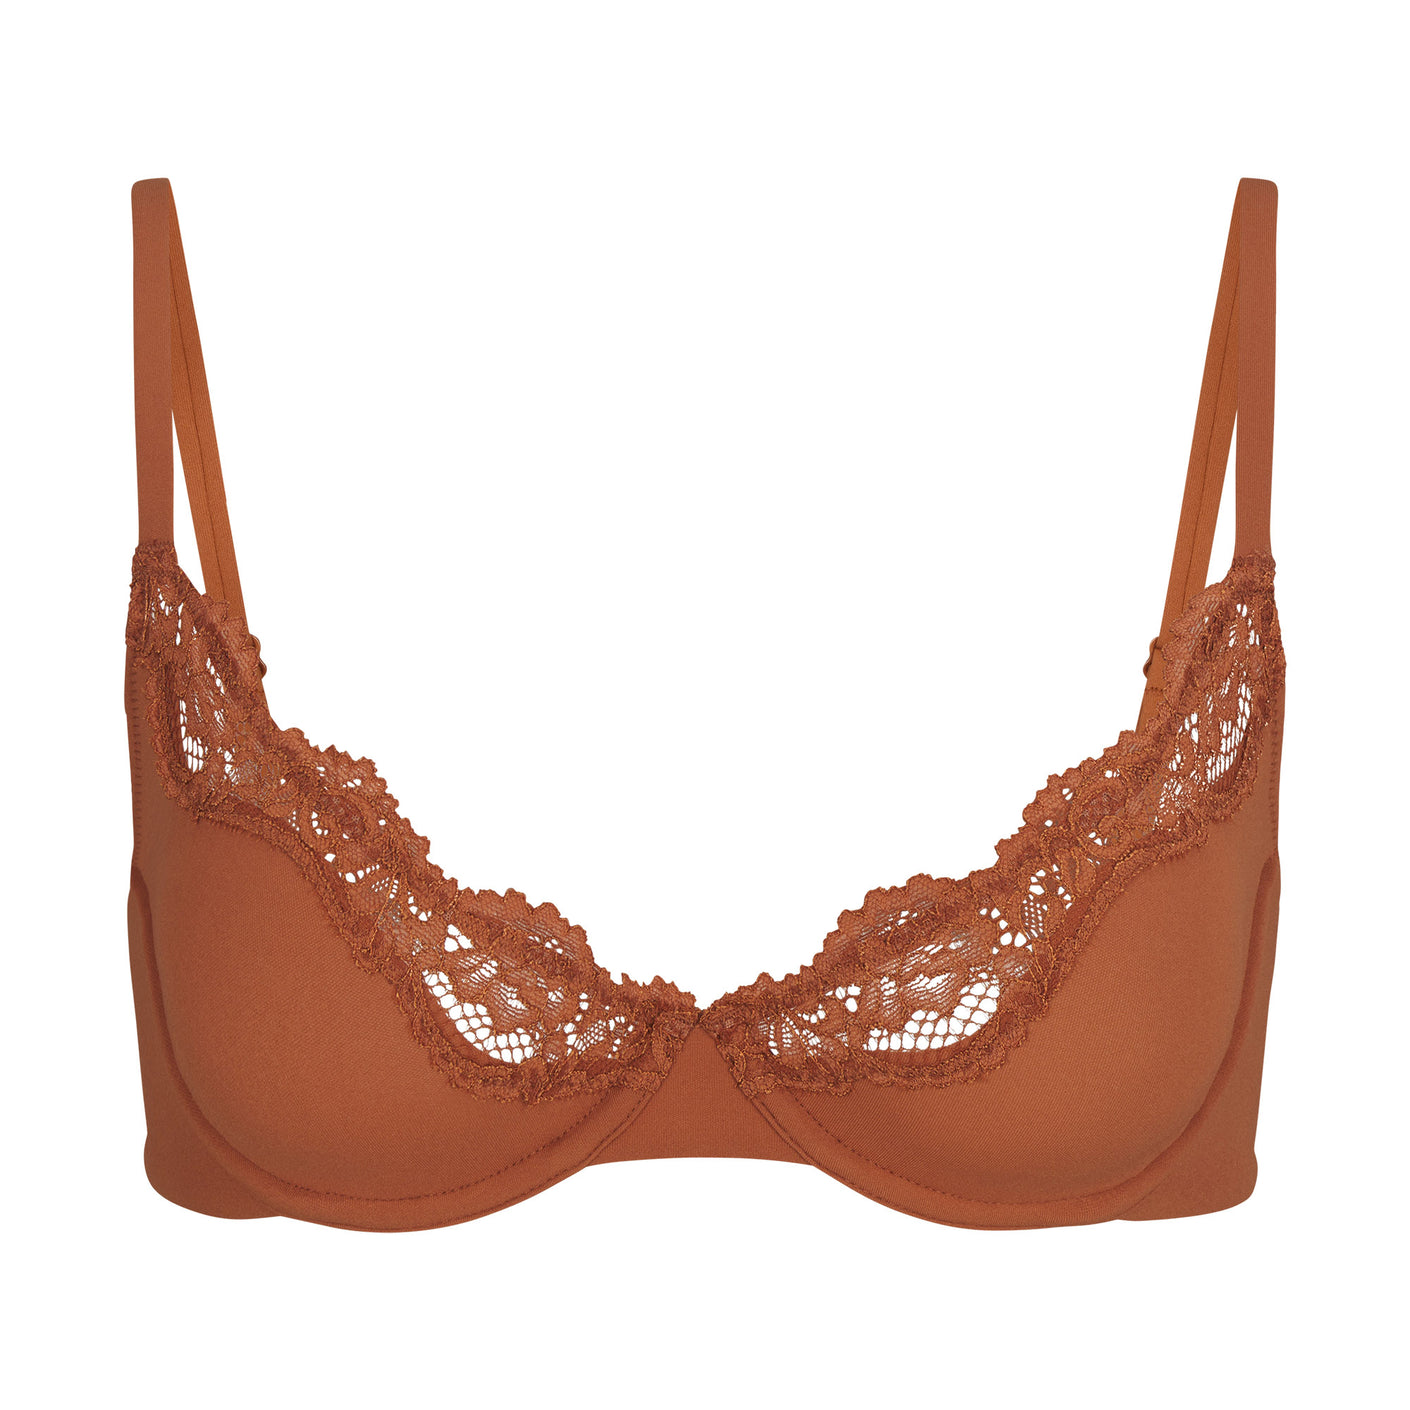 FITS EVERYBODY CORDED LACE UNLINED SCOOP BRA